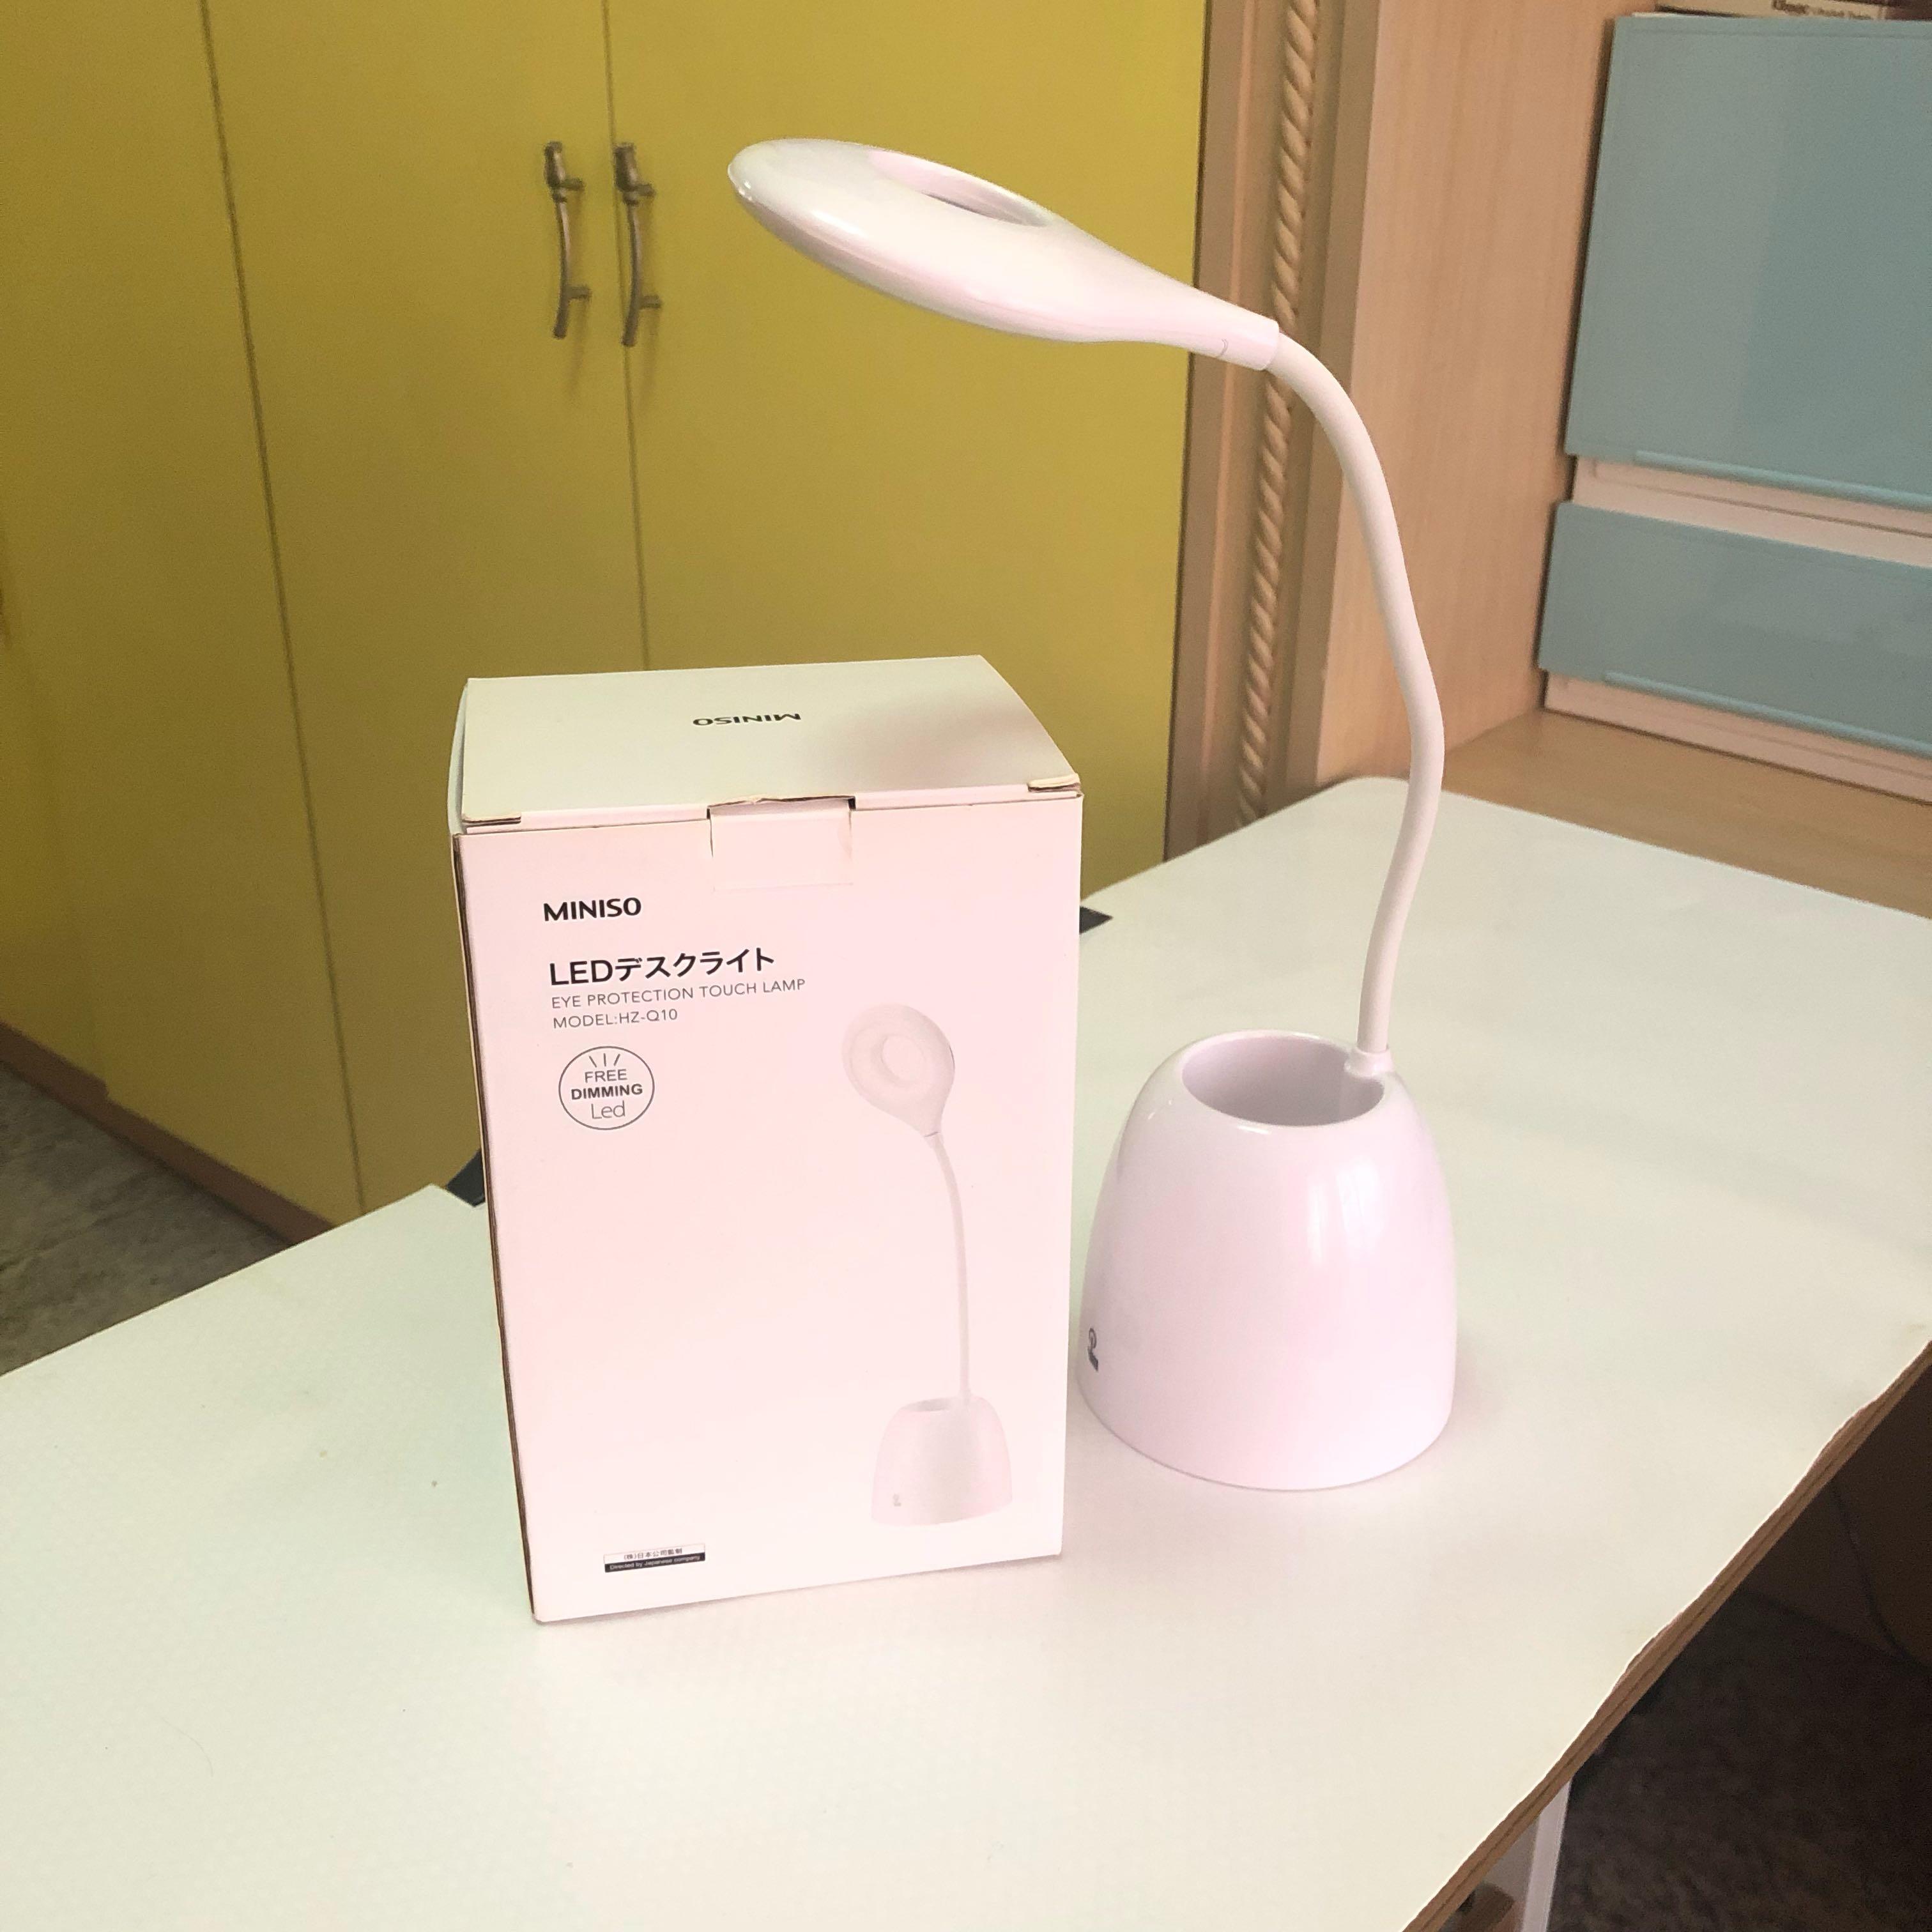 Led Desk Lamp Miniso / Miniso Desk Lamp Usb Led Table 16 With Clip Bed